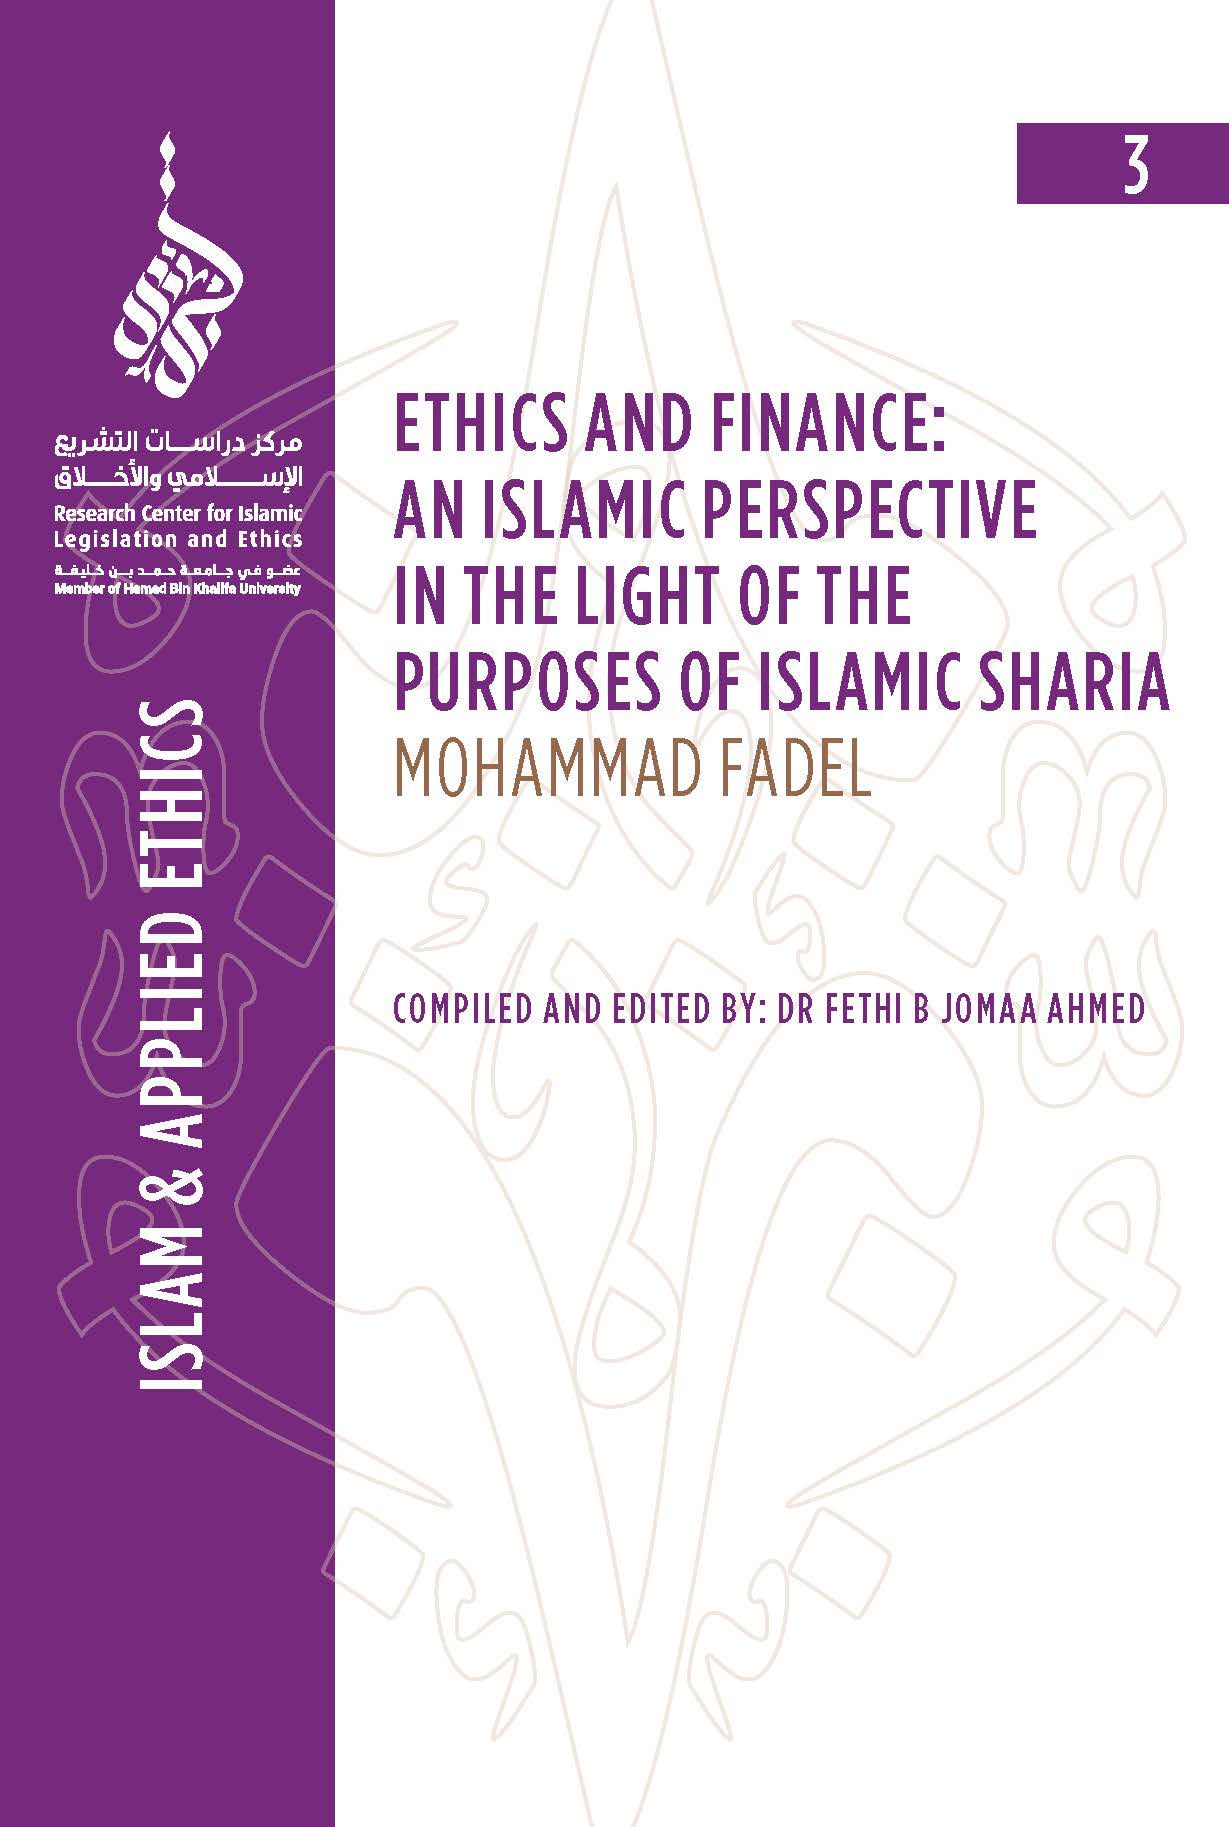 image of Ethics and Finance: an Islamic Perspective in the Light of the Purposes of Islamic Sharia